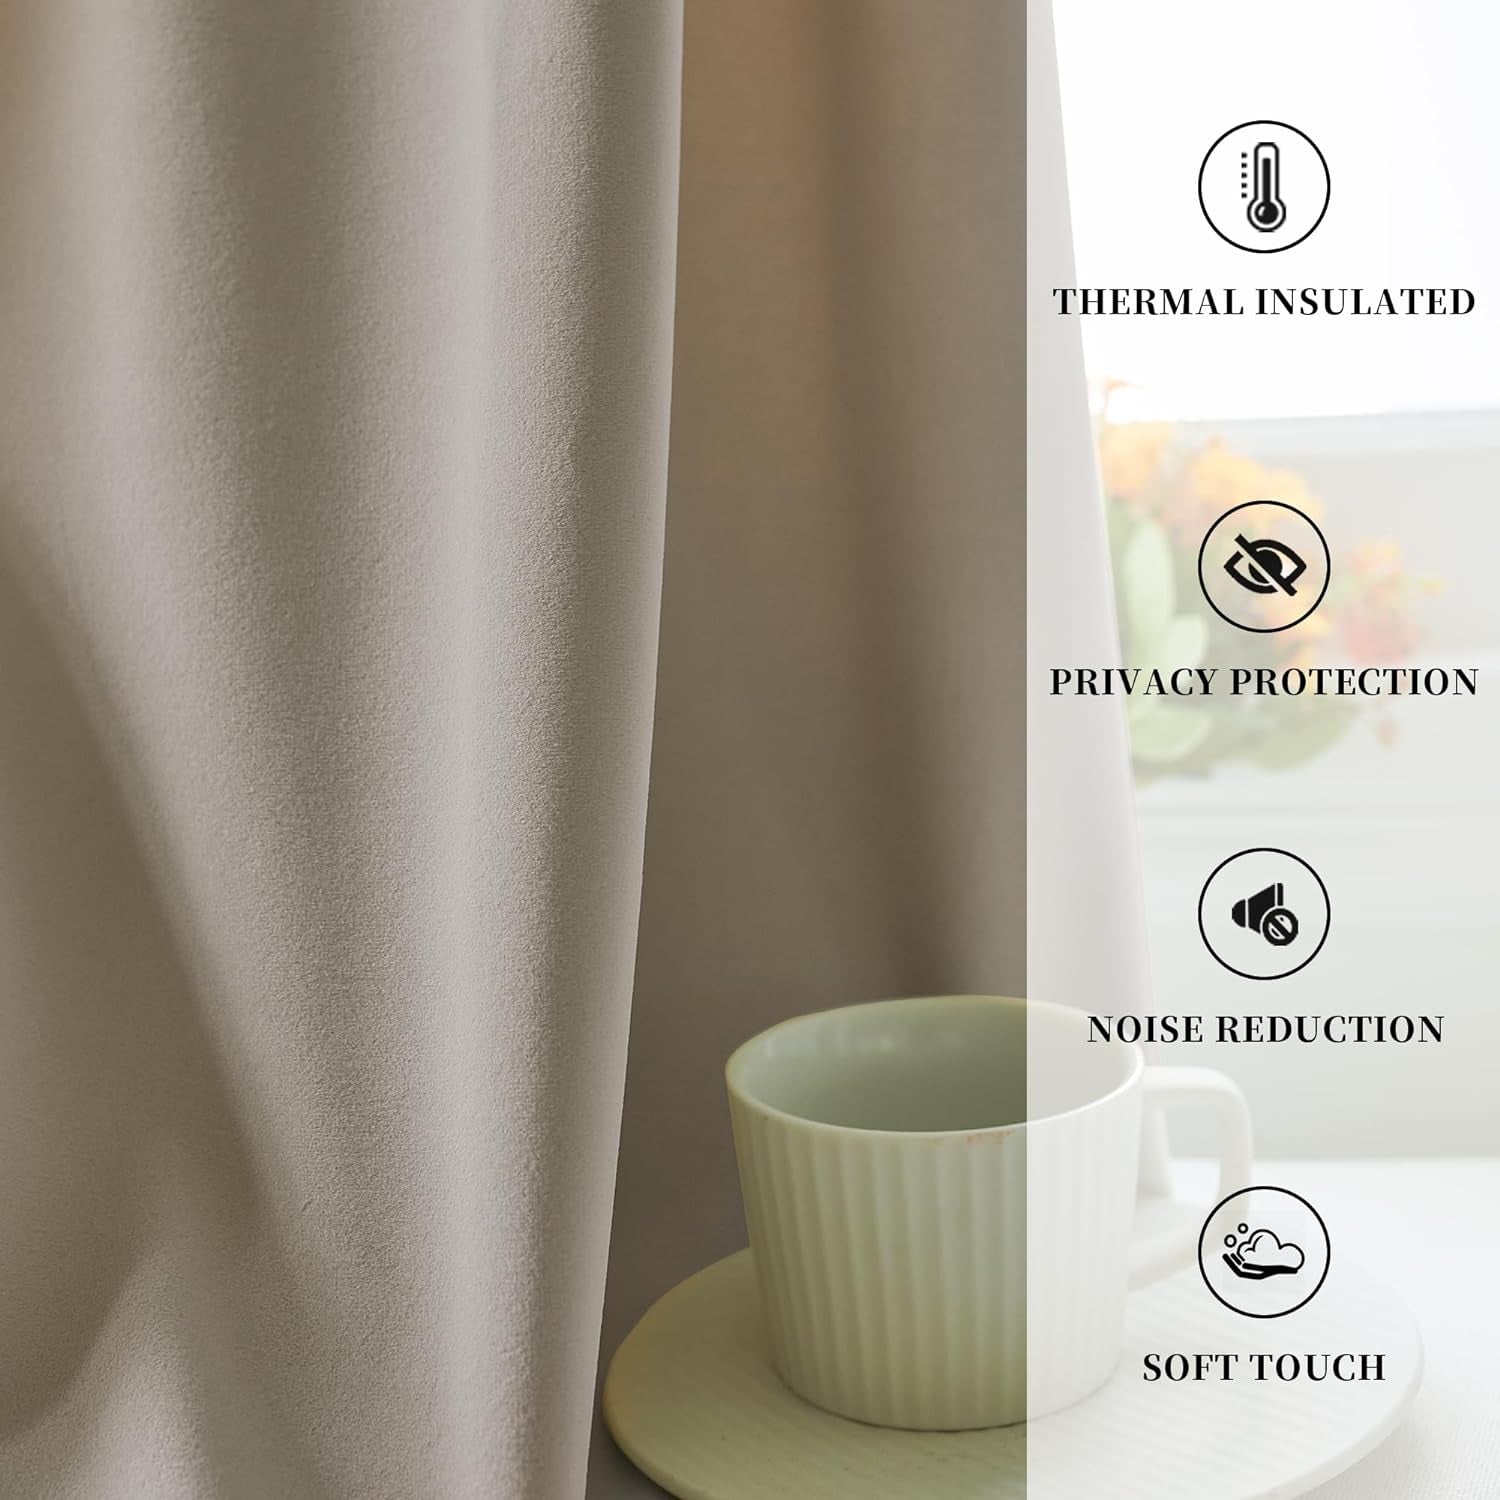 MAIHER Luxury Pinch Pleated Curtains 120 Inches Long 1 Panel, Camel Beige Velvet Pinch Pleated Drapes Panels for Patio Sliding Glass Door Living Room- Room Darkening (Camel Beige, 52” W X 120” L)  MAIHER   